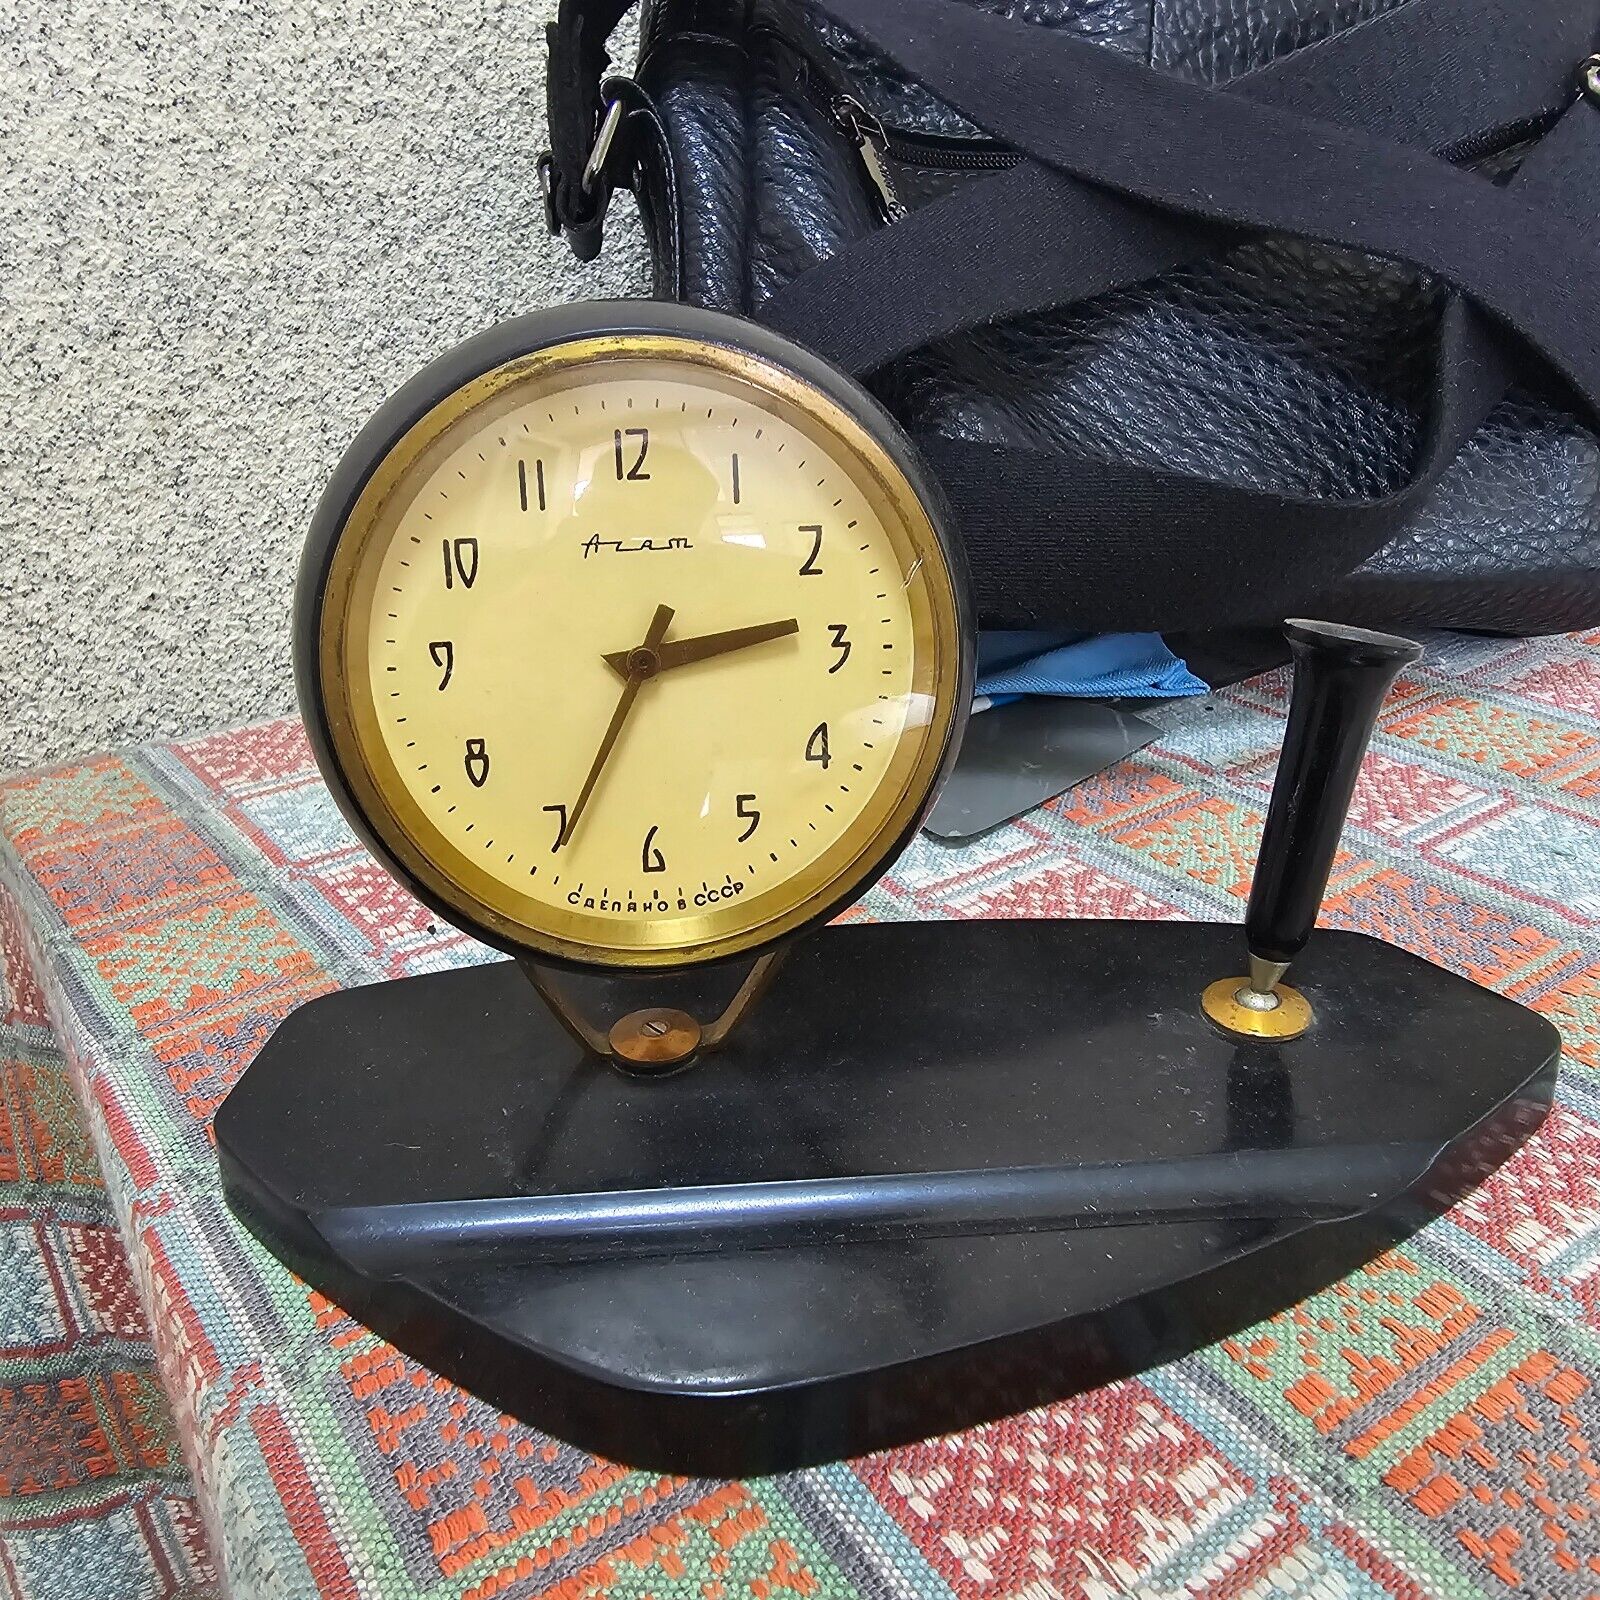 Agat watch ussr table